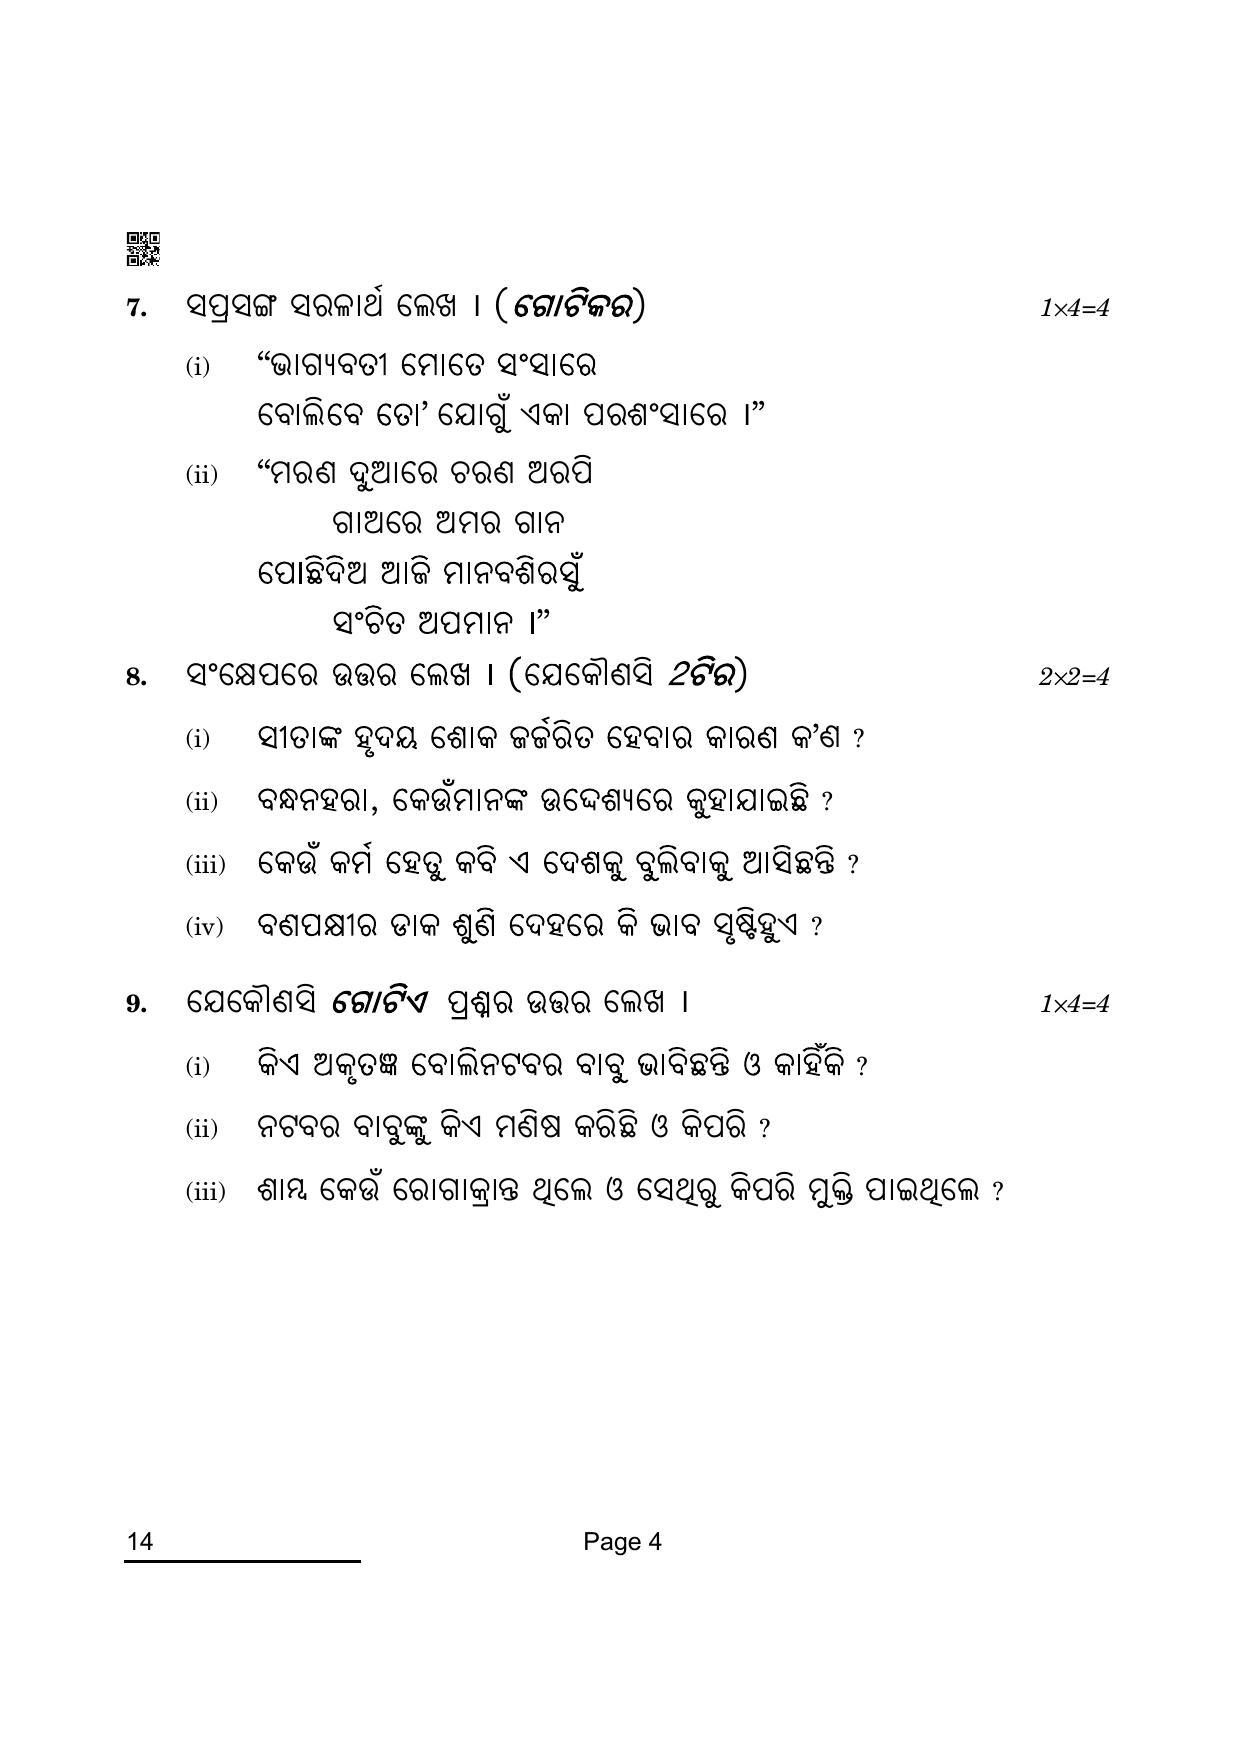 CBSE Class 10 14 Odia 2022 Question Paper - Page 4